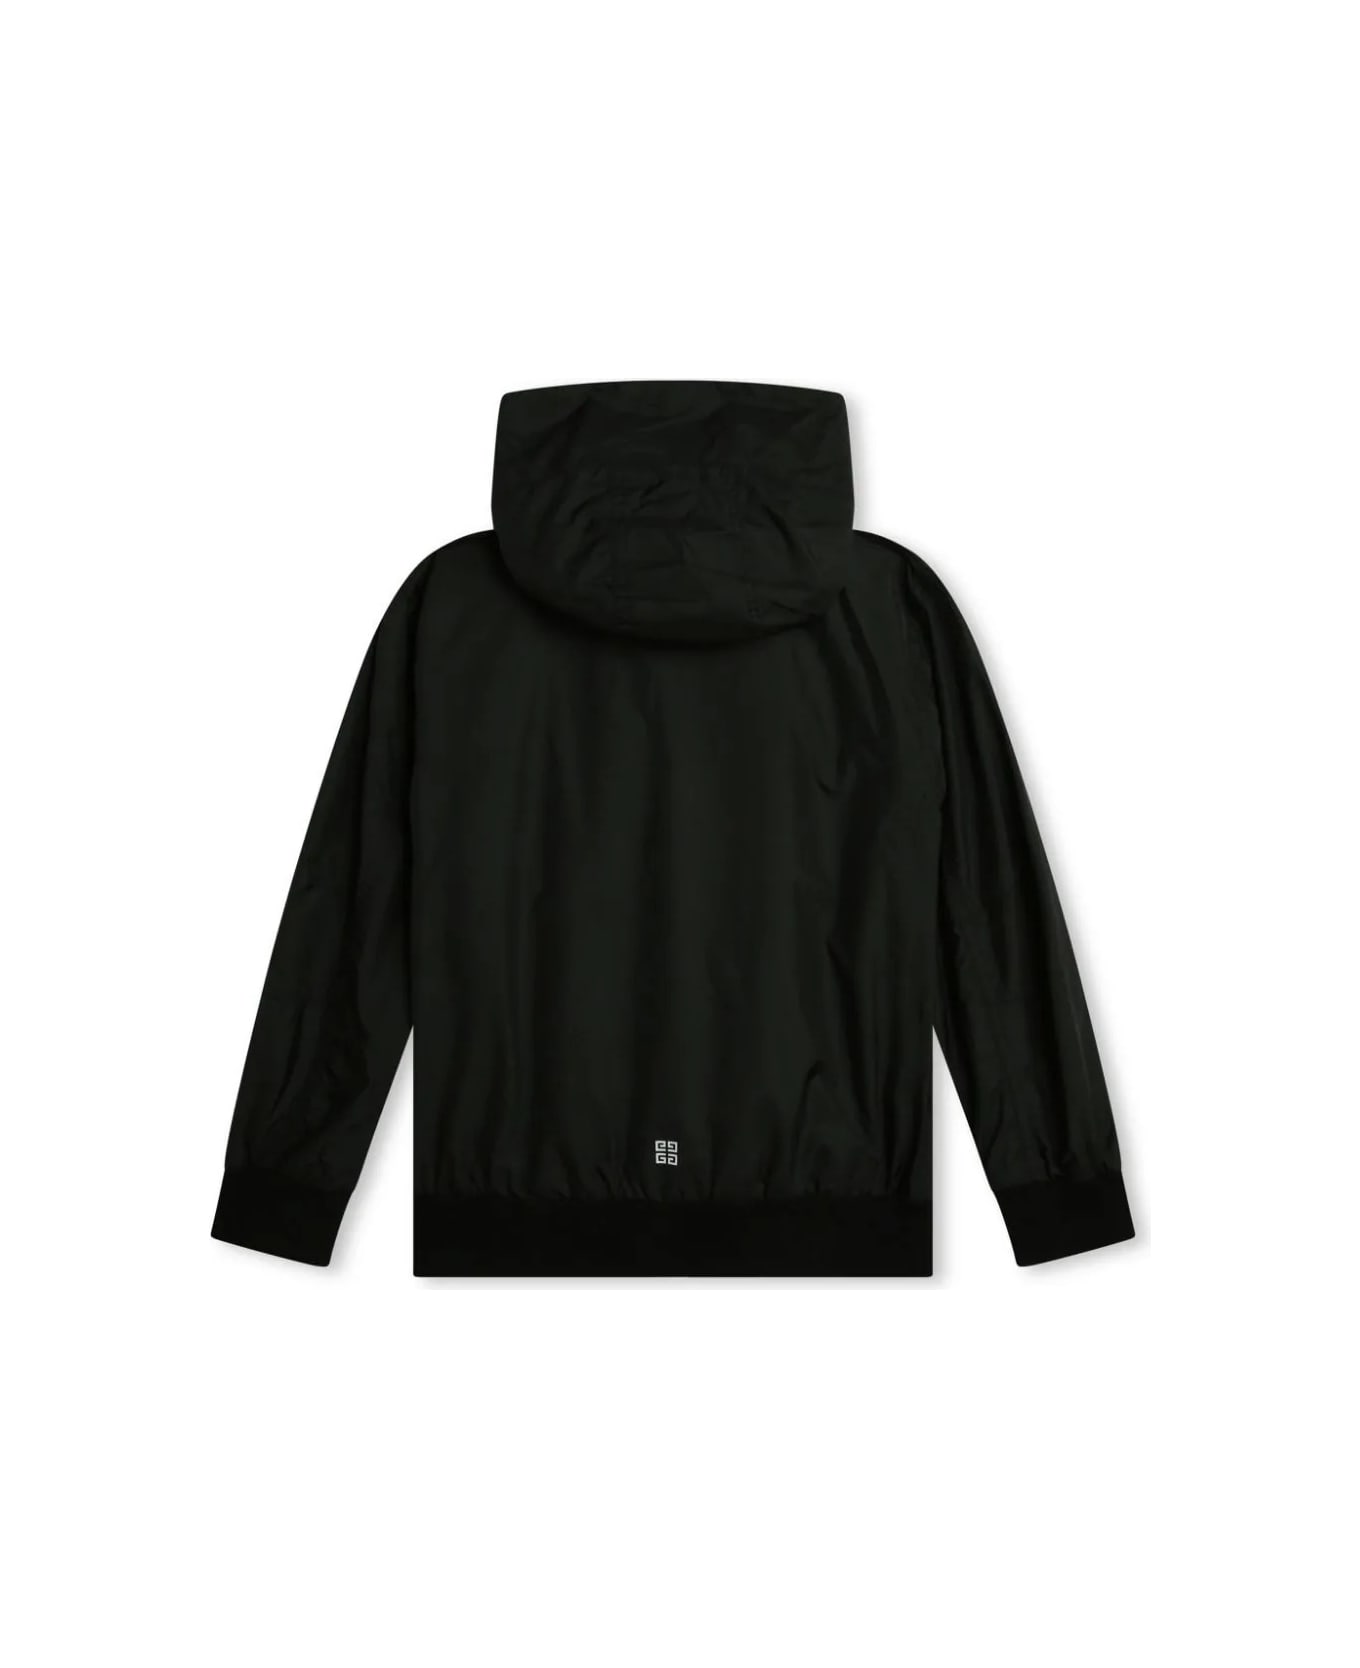 Givenchy Black Givenchy Windbreaker With Zip And Hood - Black